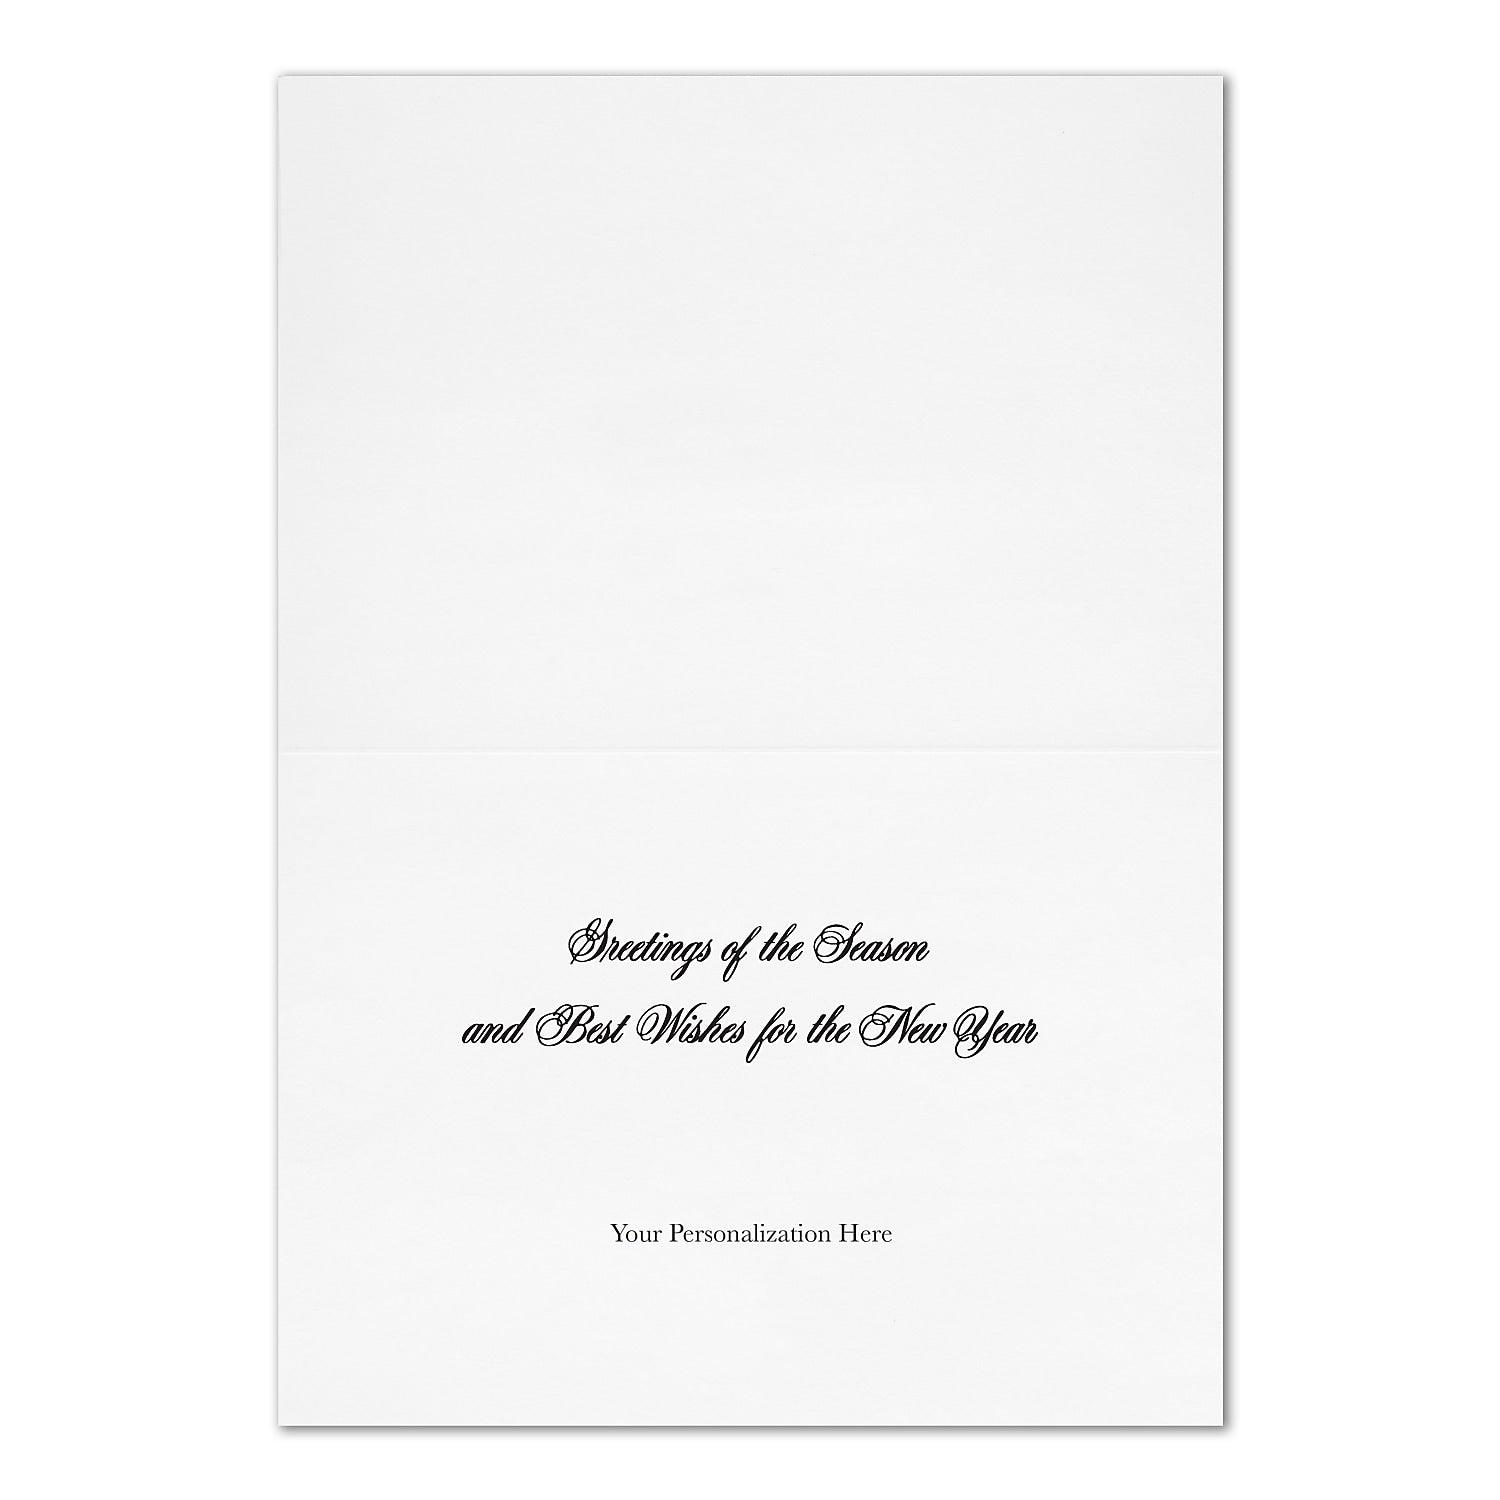 "Elegant Image" Holiday Card w/ Fastick Silver Lined White Envelope, 400/BX